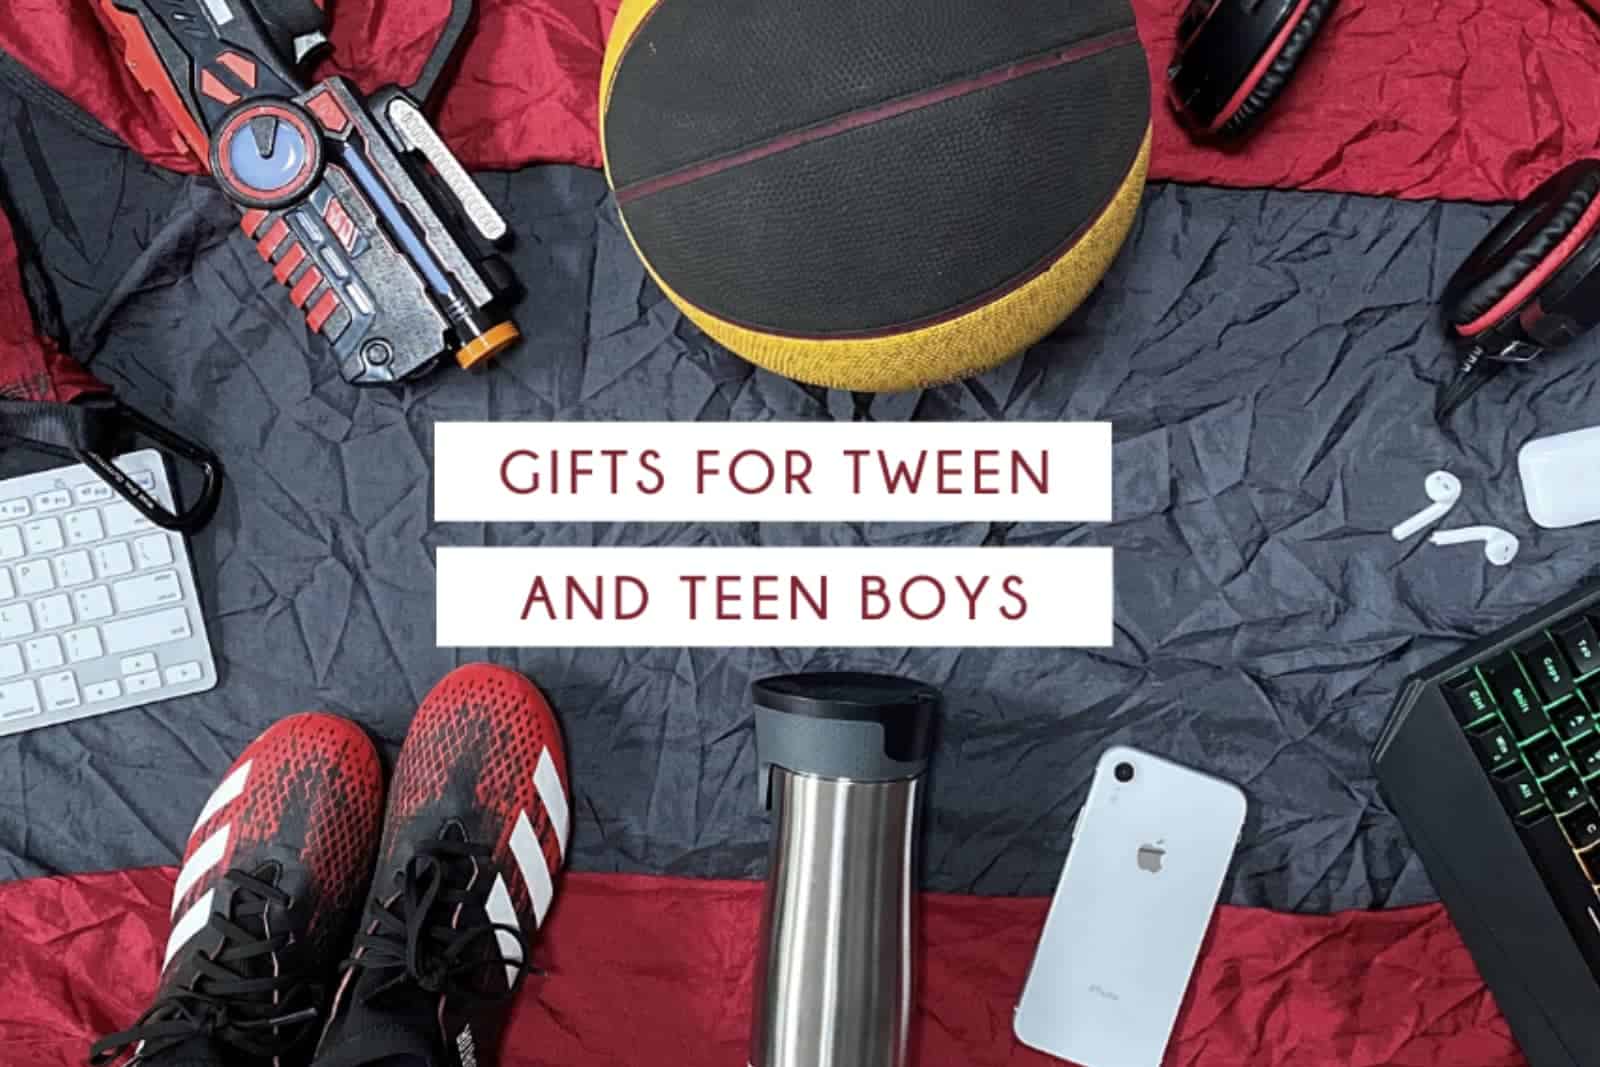 White rectangles in the middle of the image with burgundy lettering that says, "Gifts for tween and teen boys." On a flat lay of electronics and sports equipment in black and burgundy around the edges